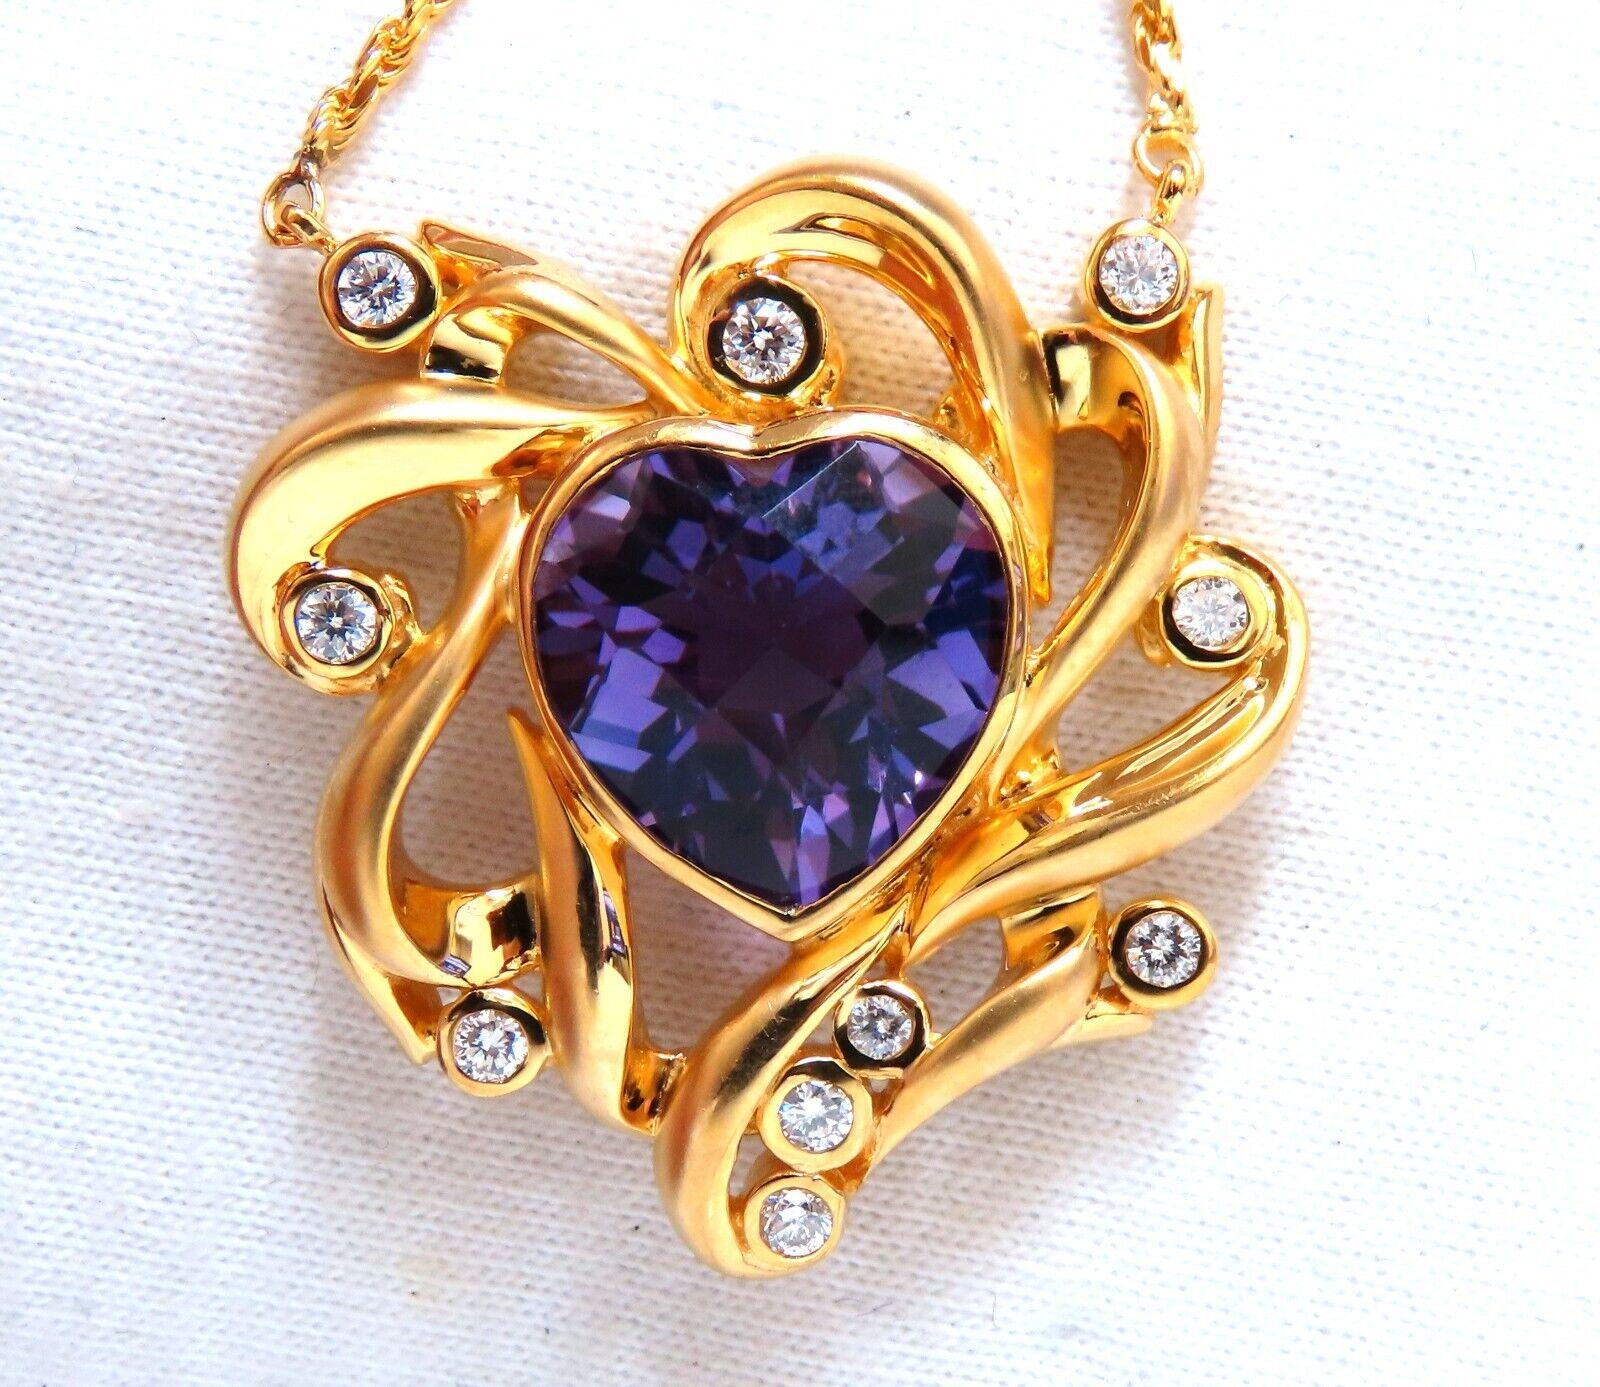 6 carat natural heart-shaped amethyst necklace.


Modified Royal Crest design.


Amethyst measures 11x10 mm

Clean quality transparent

Rose cut, checkerboard


.50 carat natural round side diamonds

H/vs2 clarity


14 karat yellow gold, 13.8